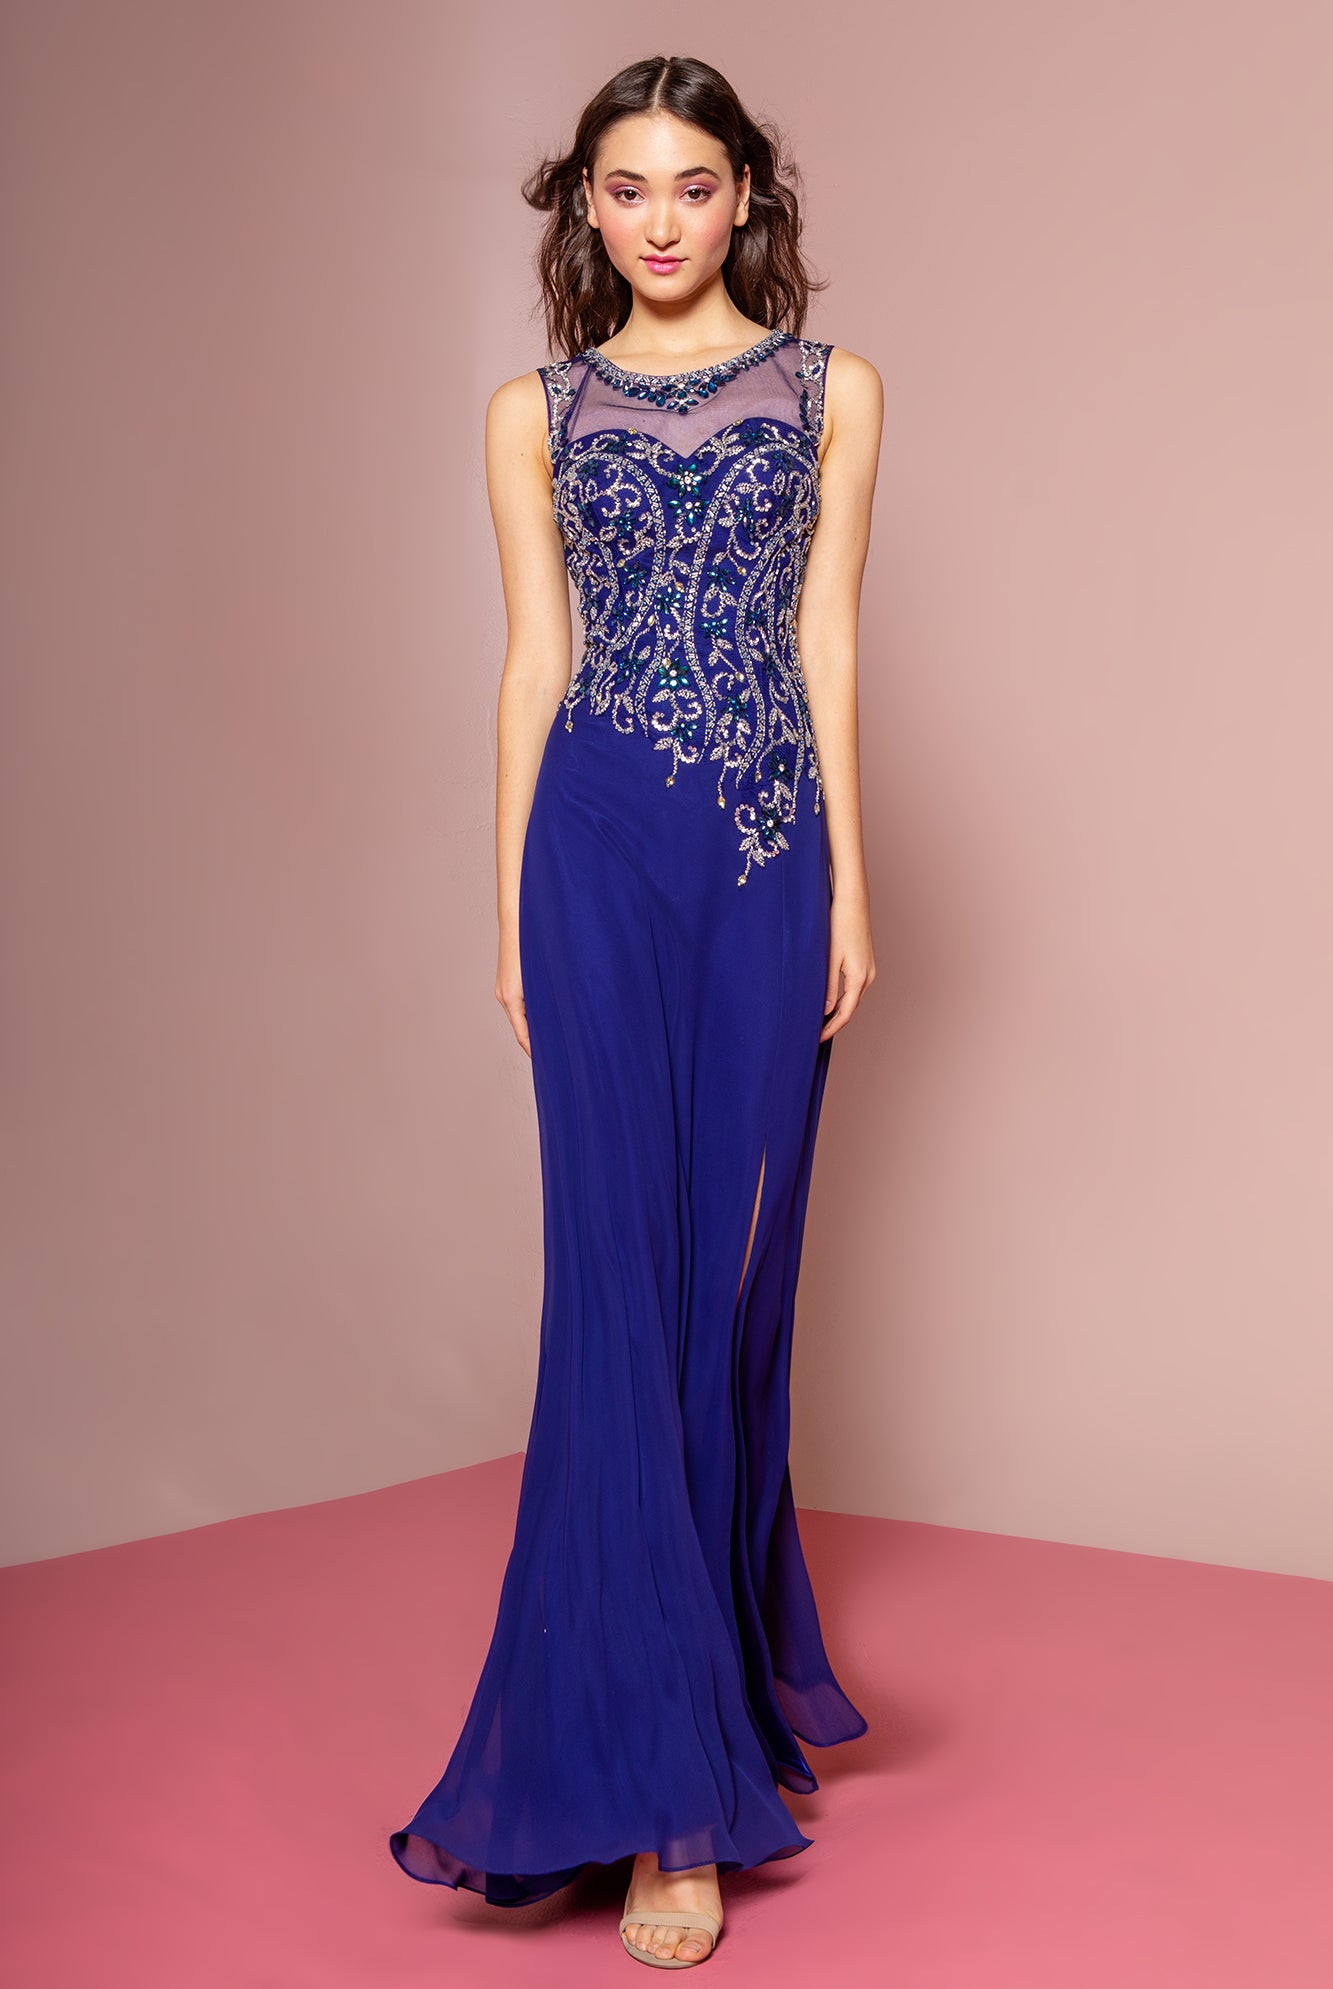 Beaded Chiffon Dress with Sheer Neckline and Side Slit-smcdress